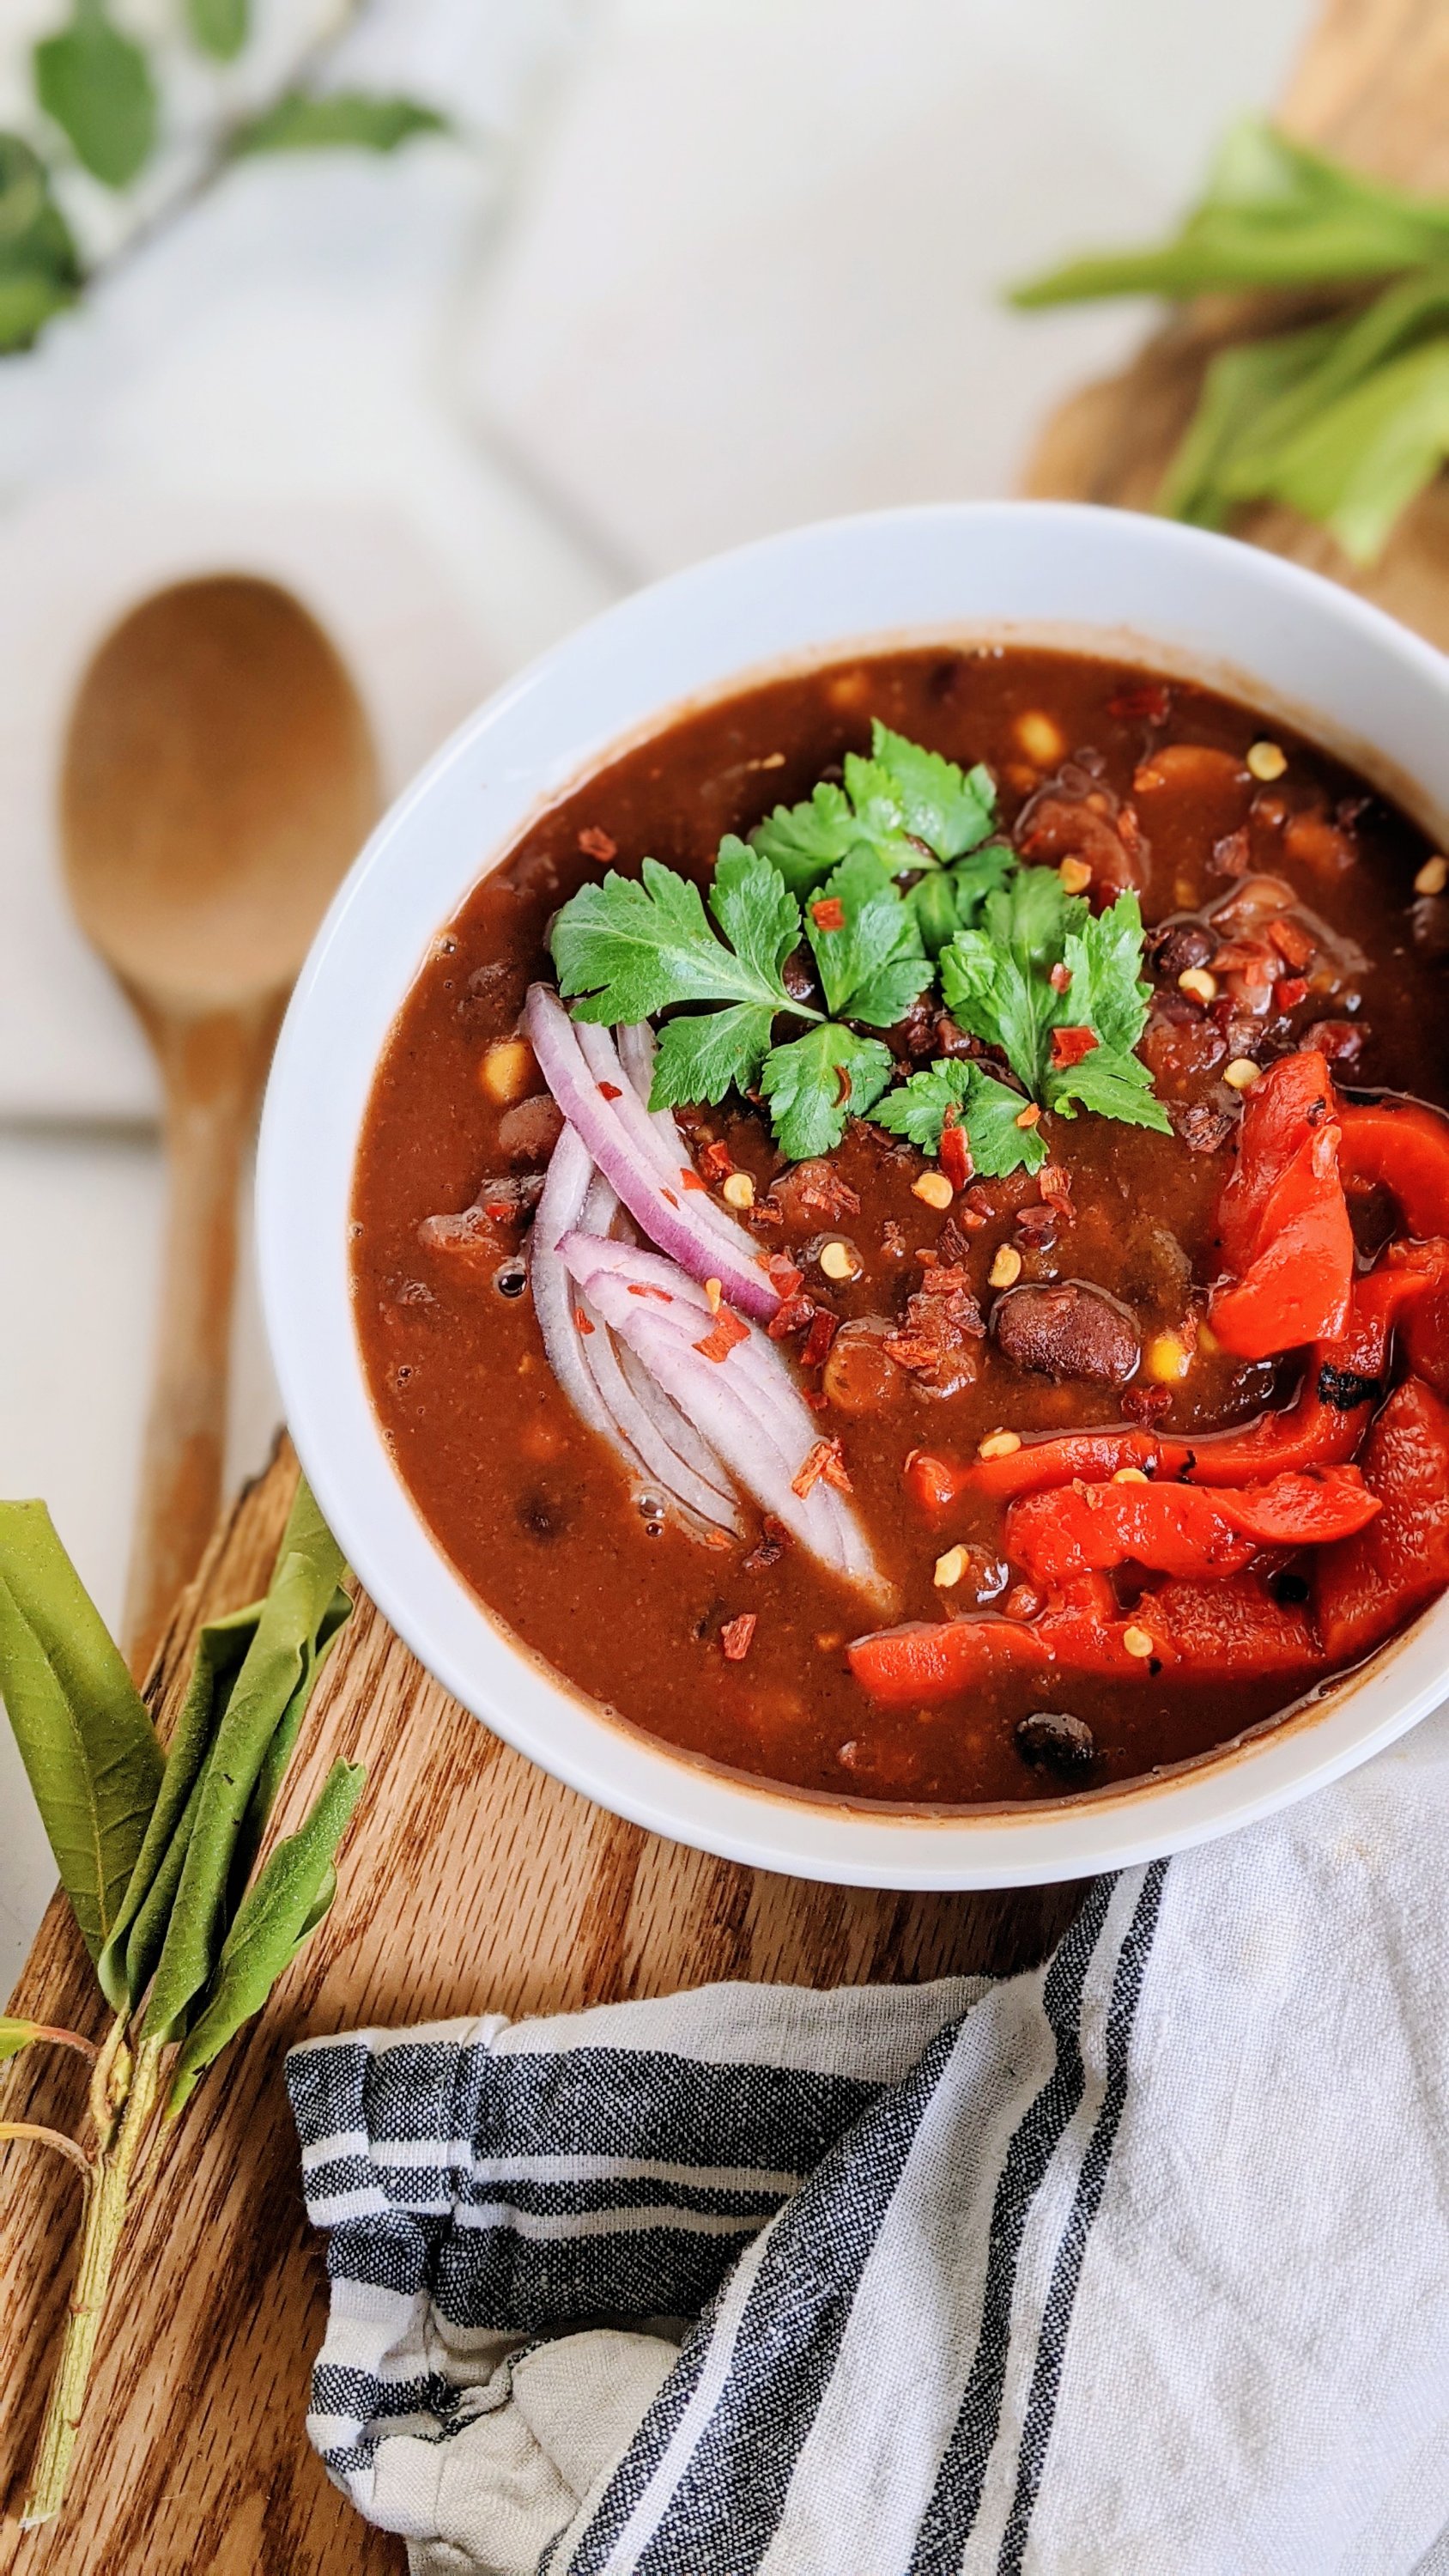 healthy vegan bean chili recipe with pinto beans habichuelas kidney beans rojos black beans negro high protein vegetarian chili recipes slow cooker instant pot pressure cooker stove top